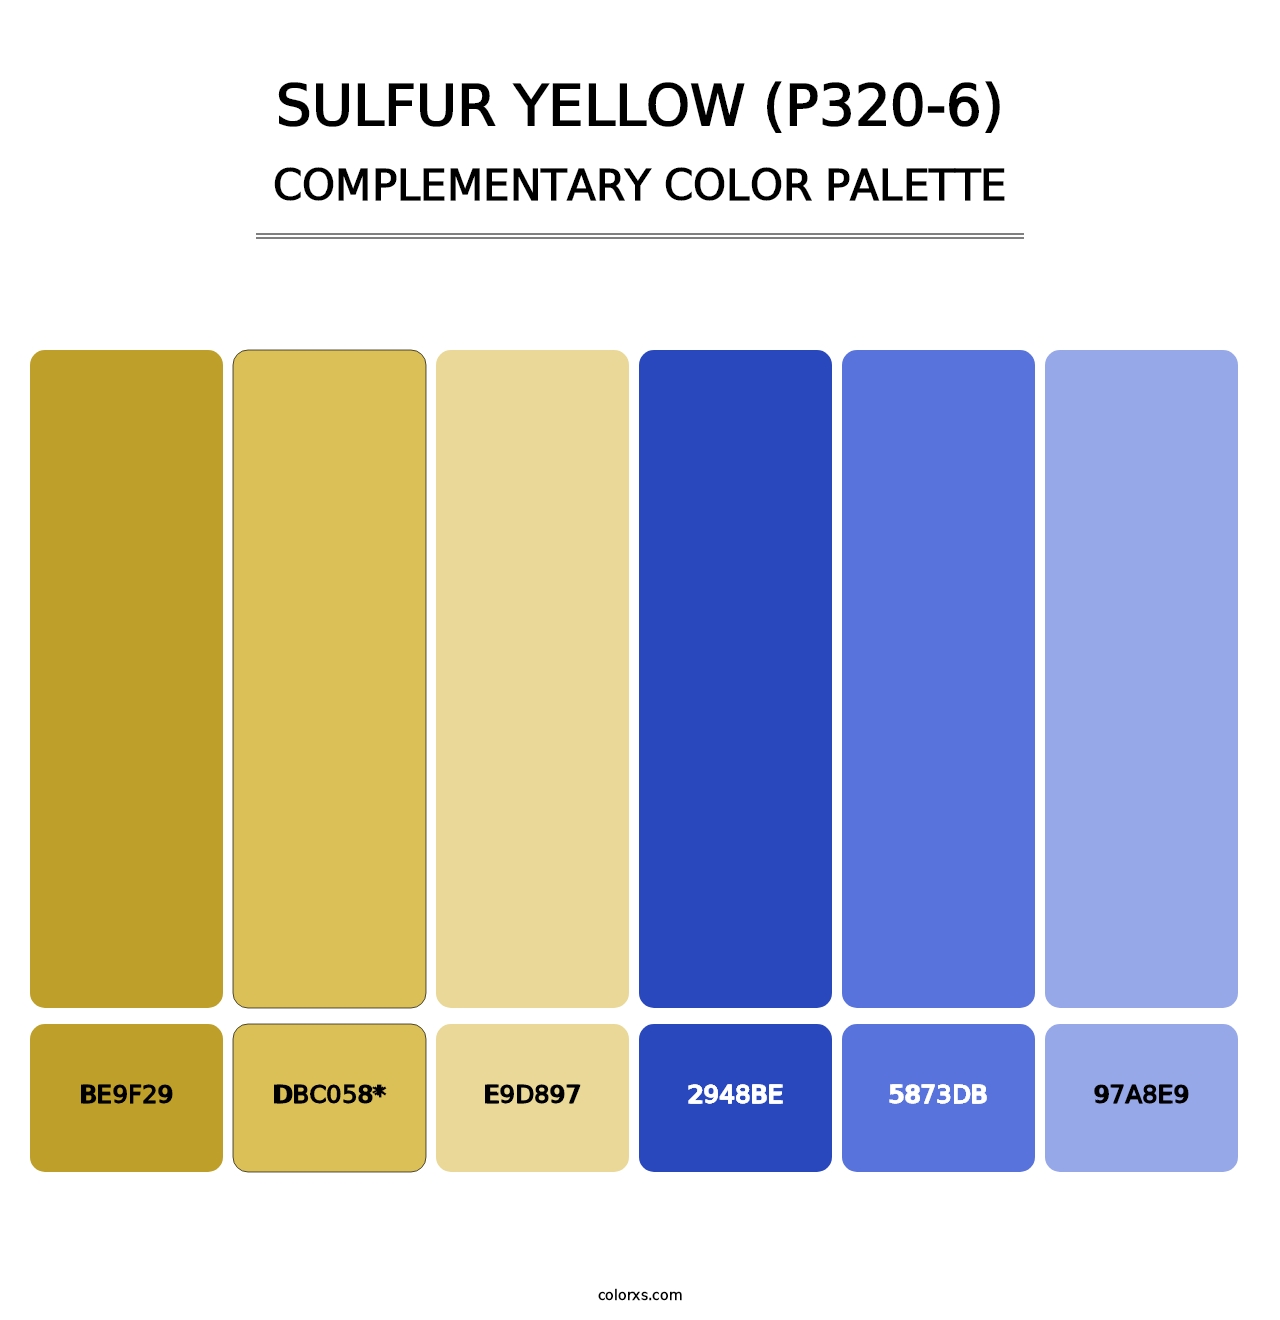 Sulfur Yellow (P320-6) - Complementary Color Palette